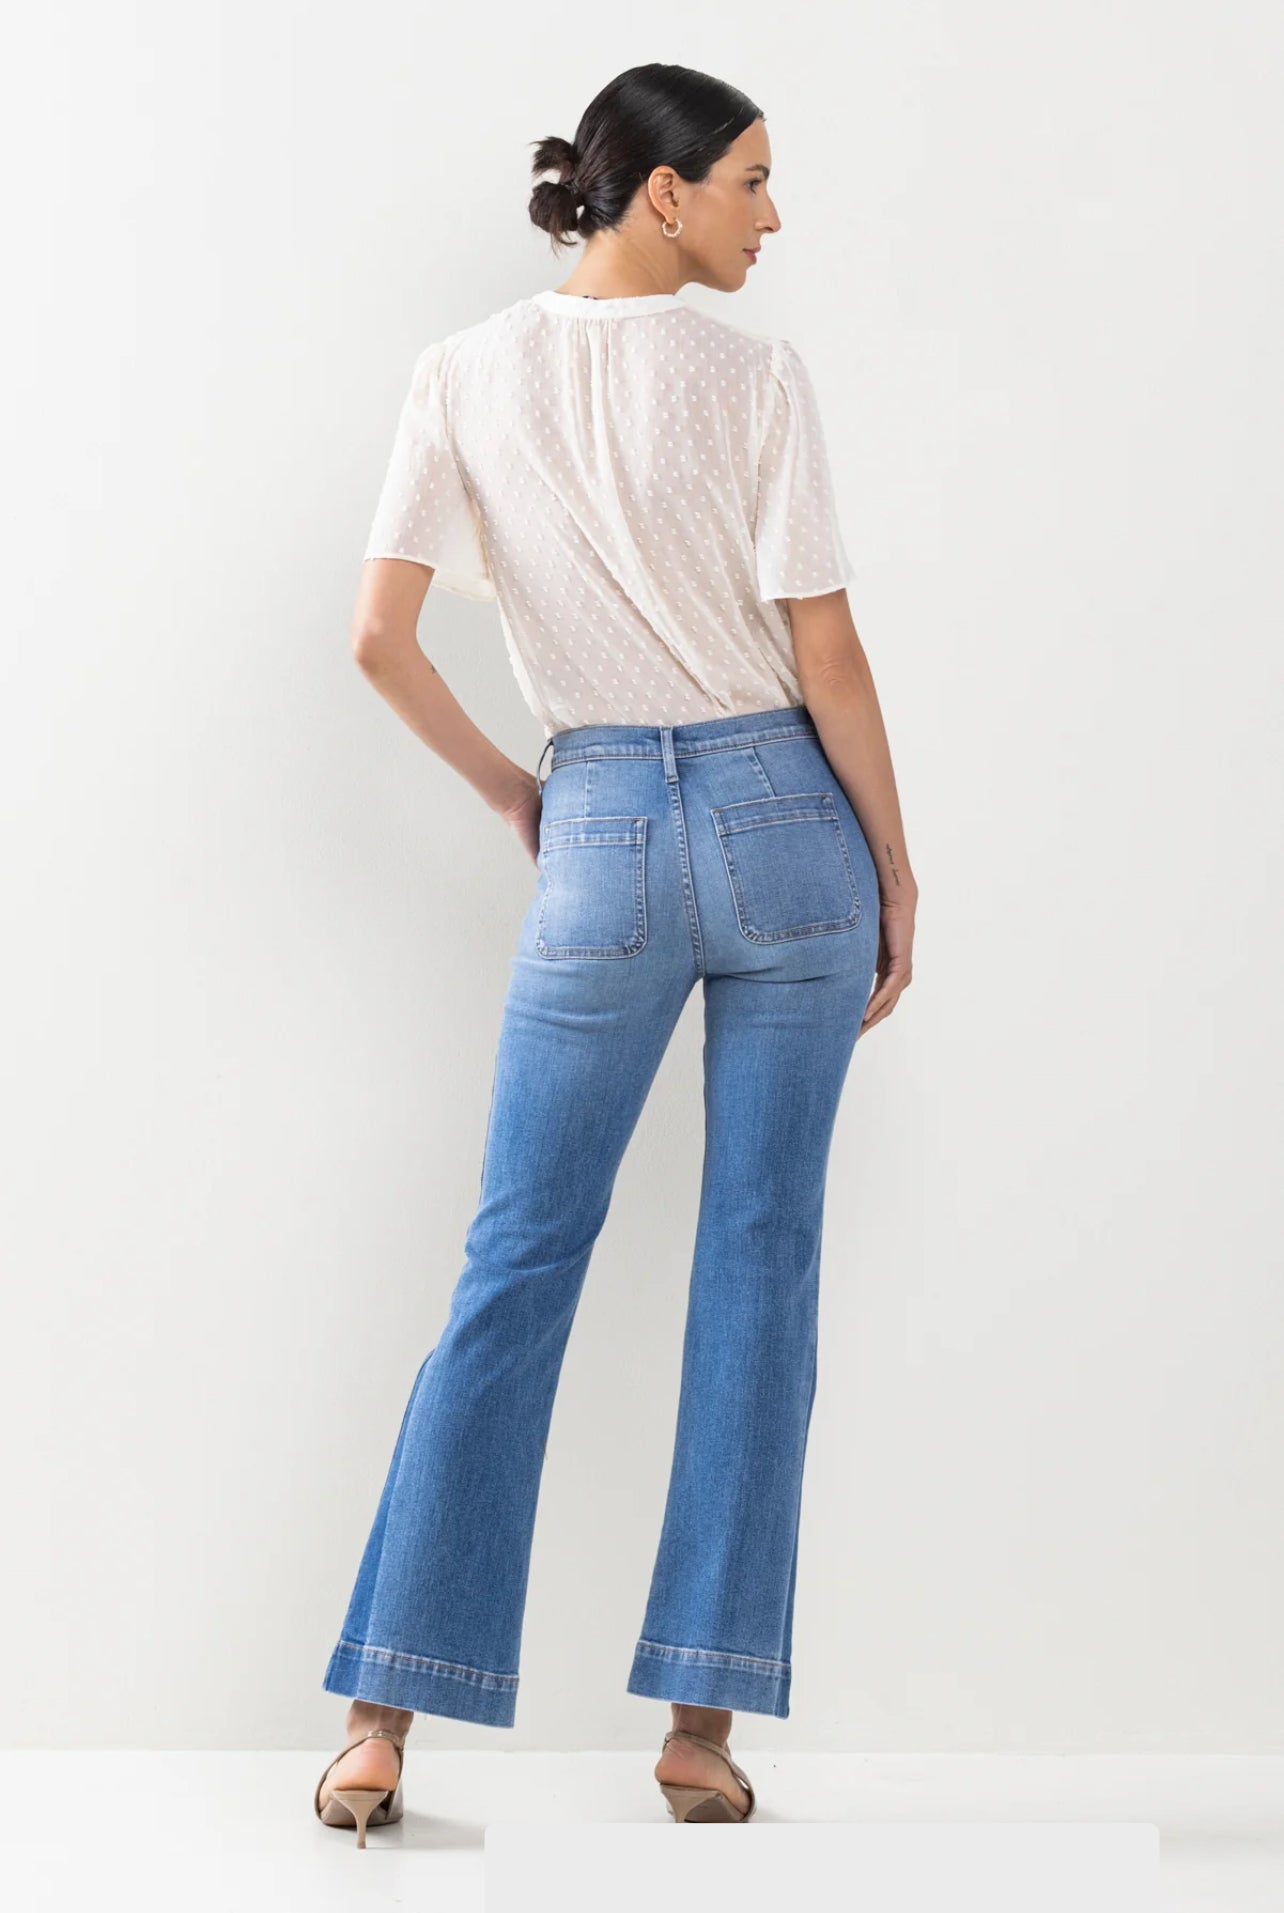 Top Tier HR Flare Jeans